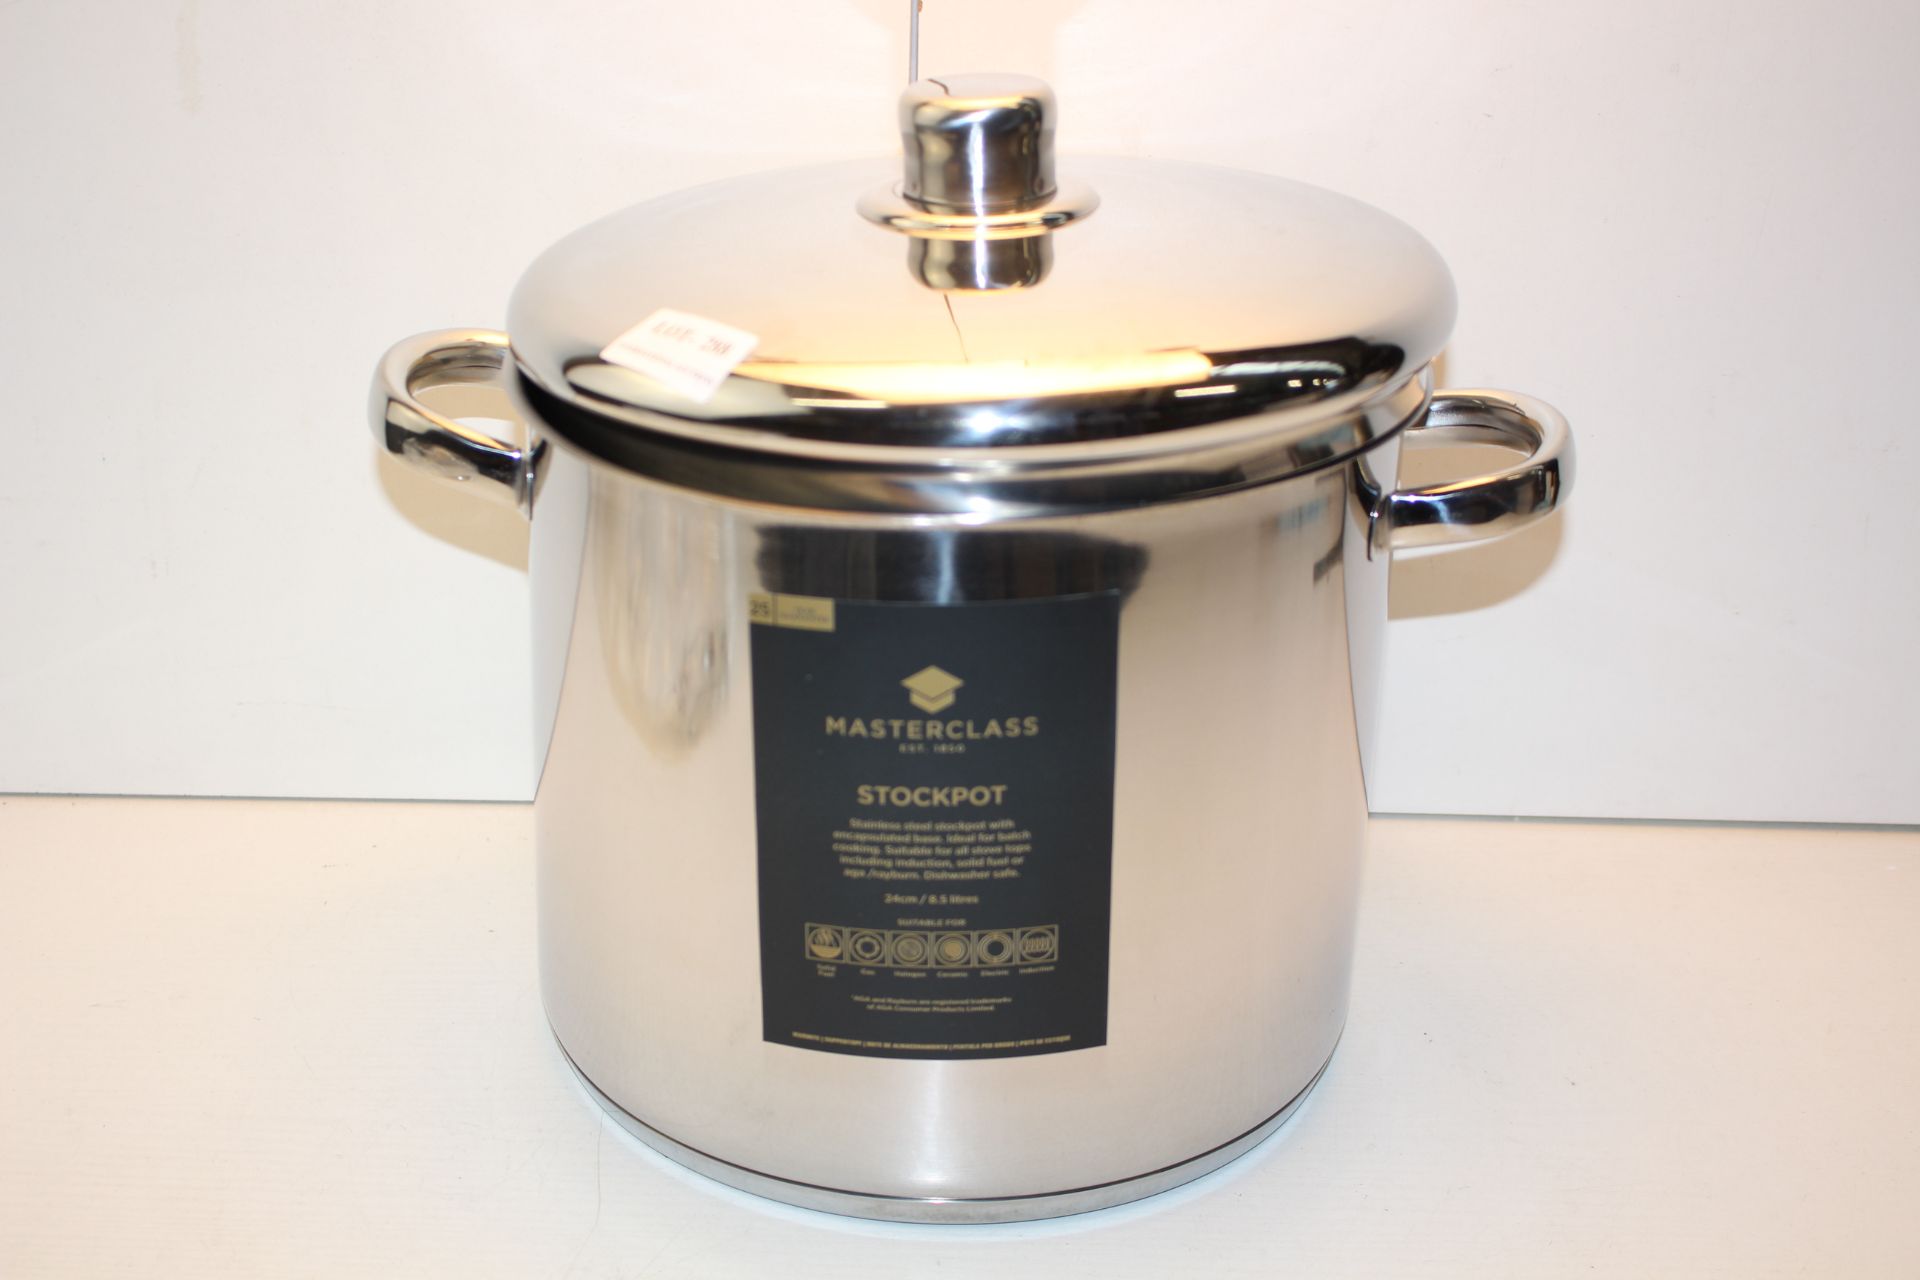 UNBOXED MASTERCLASS STOCK POT 24CM 8.5LITRESCondition ReportAppraisal Available on Request- All